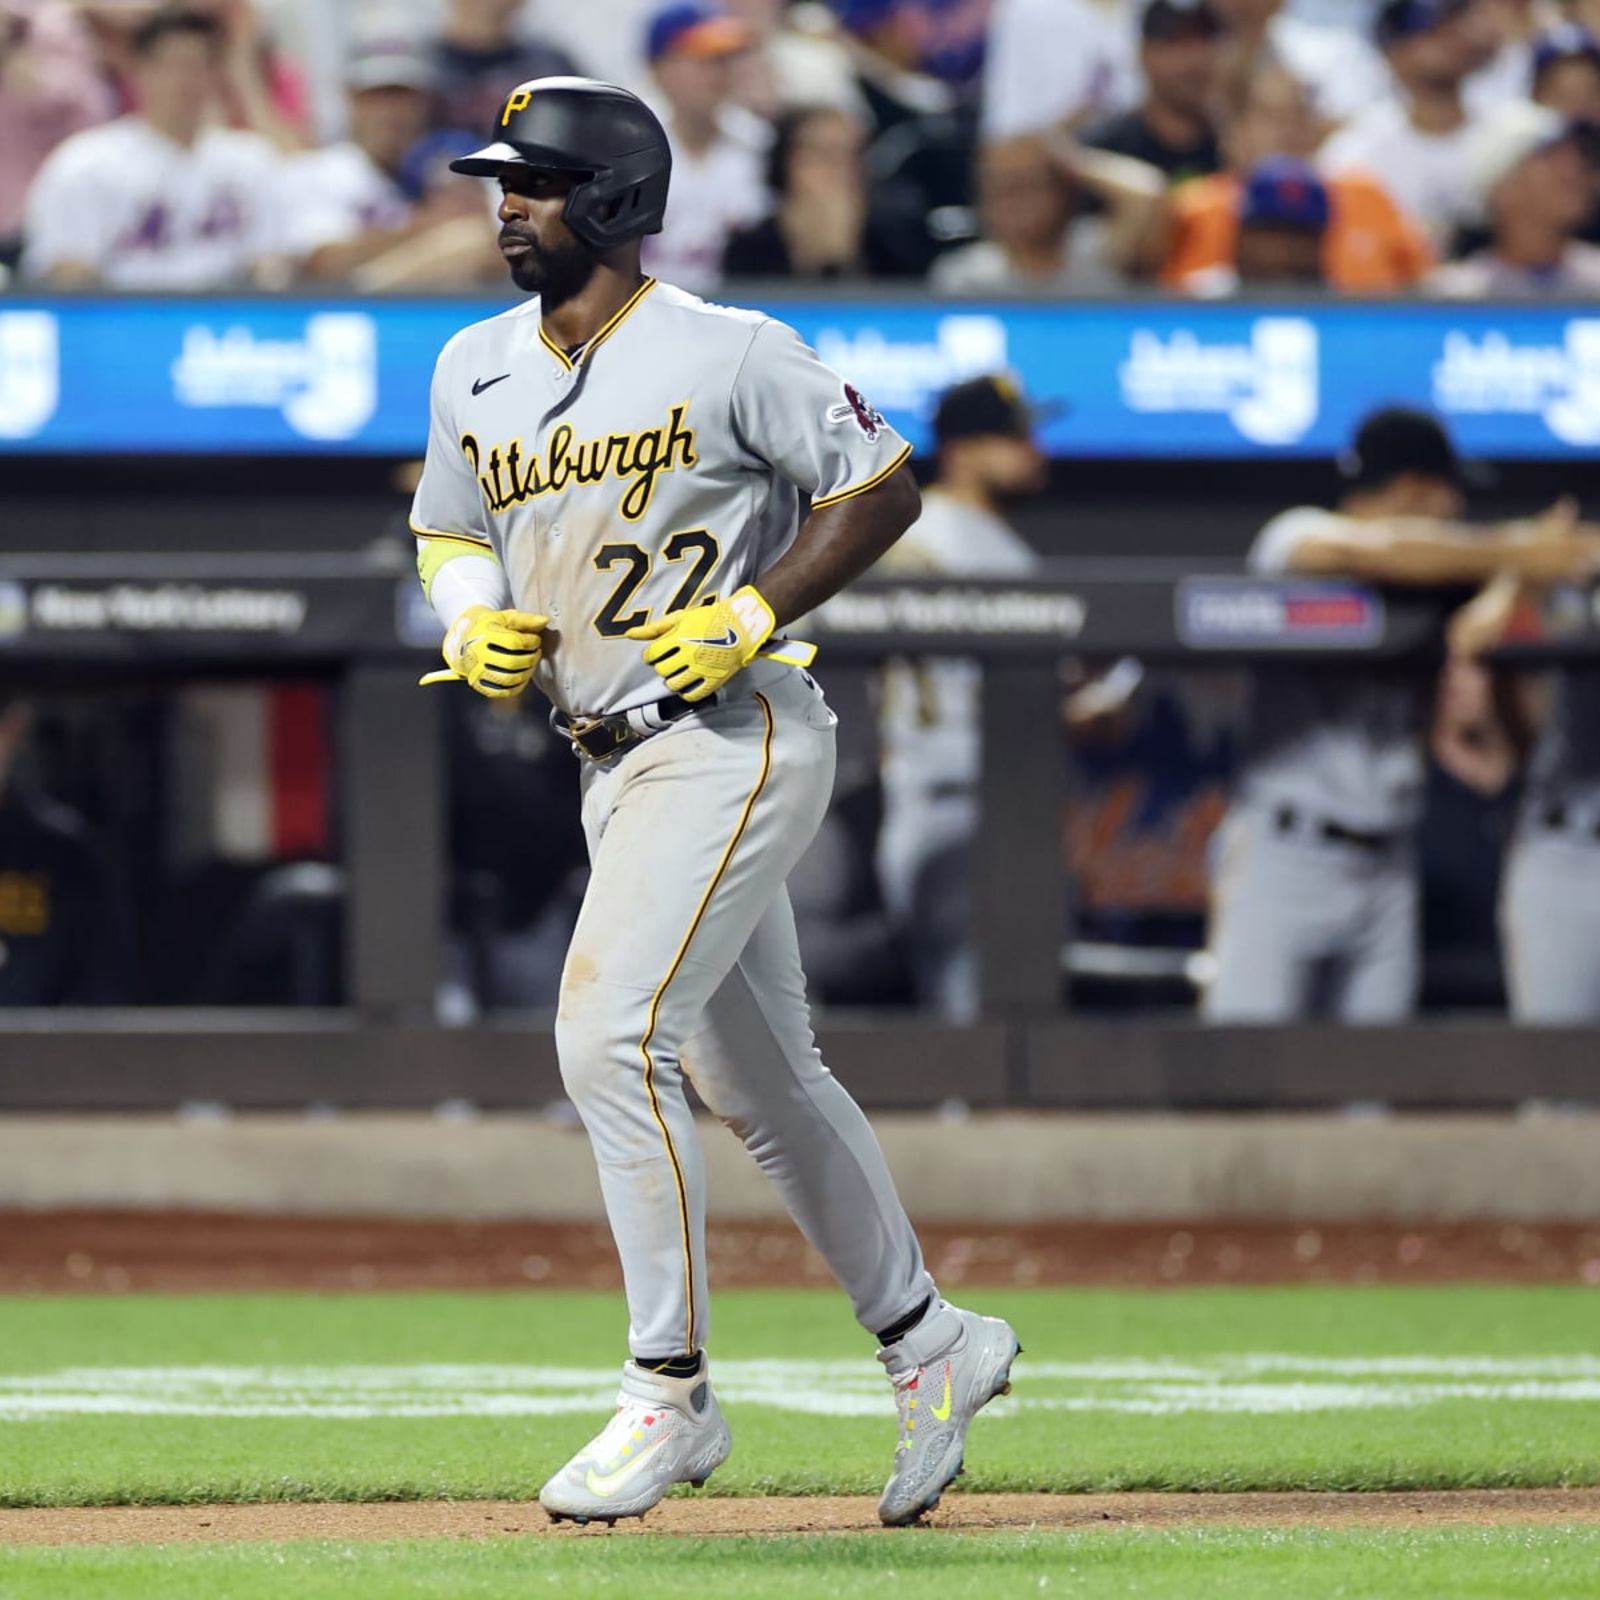 Andrew McCutchen set to return to Pirates lineup after injury